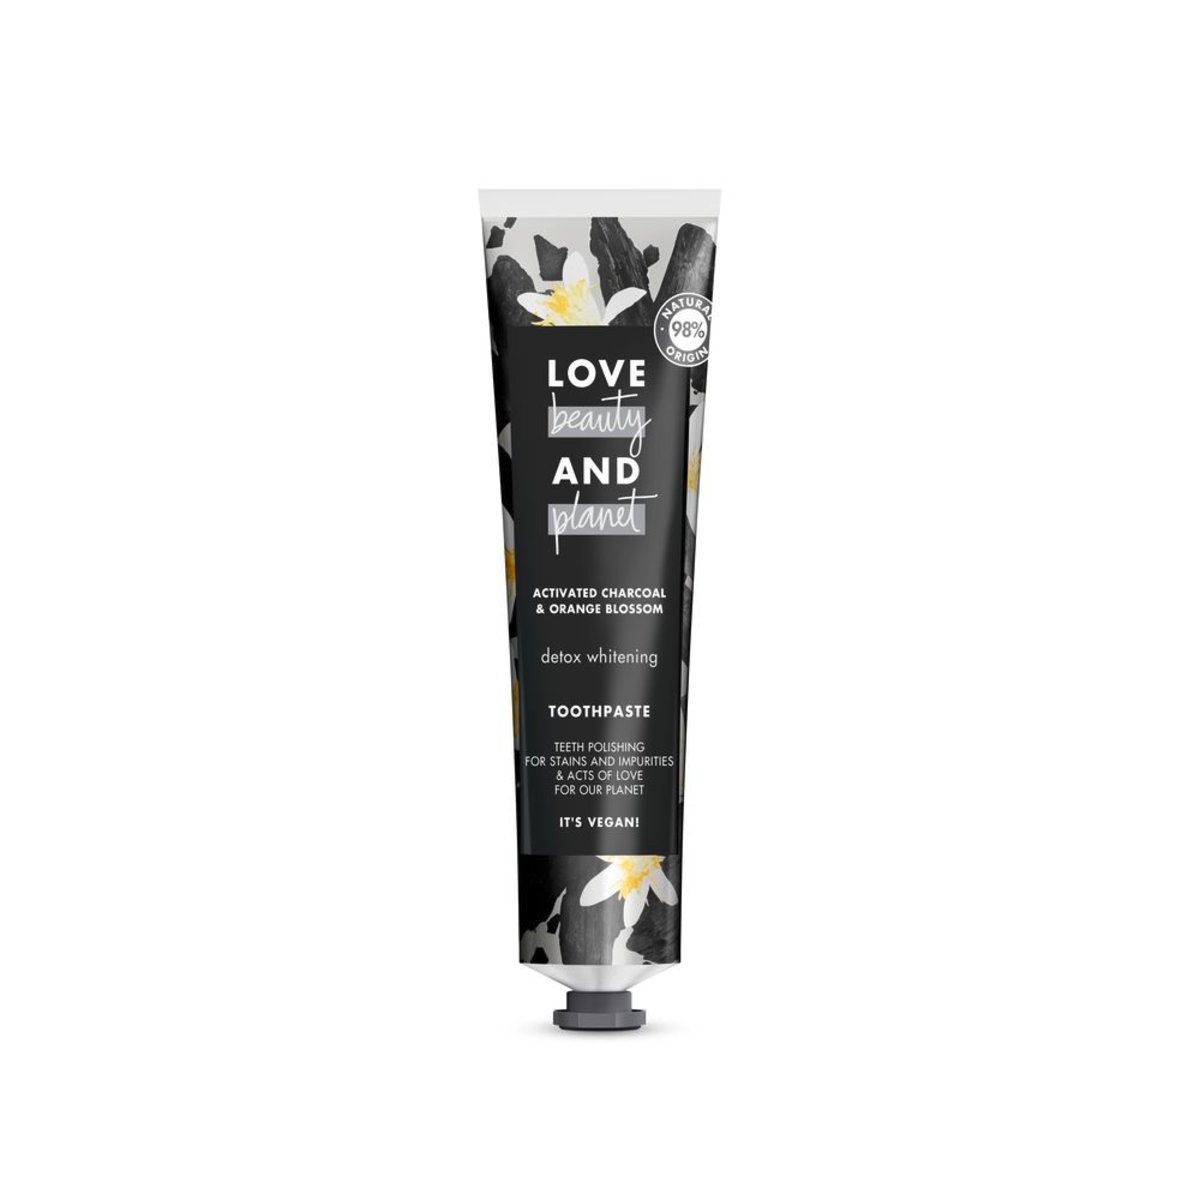 Love Beauty and Planet Detox Whitening Activated Charcoal and Orange Blossom Toothpaste 75 ml